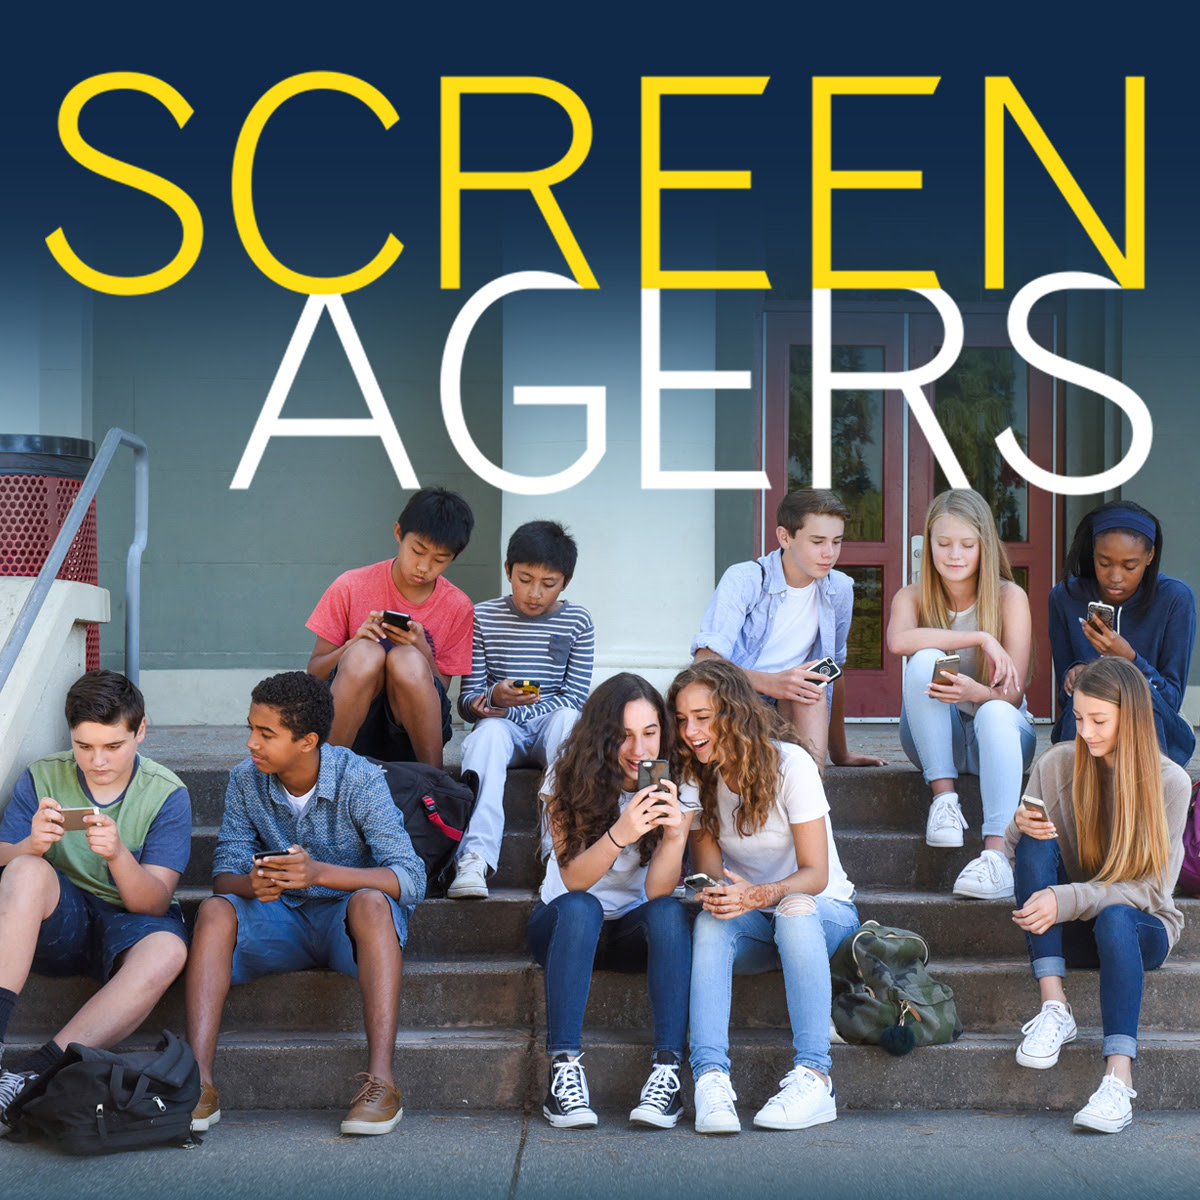 Screenagers Film Presented By Fox Valley Church of Christ